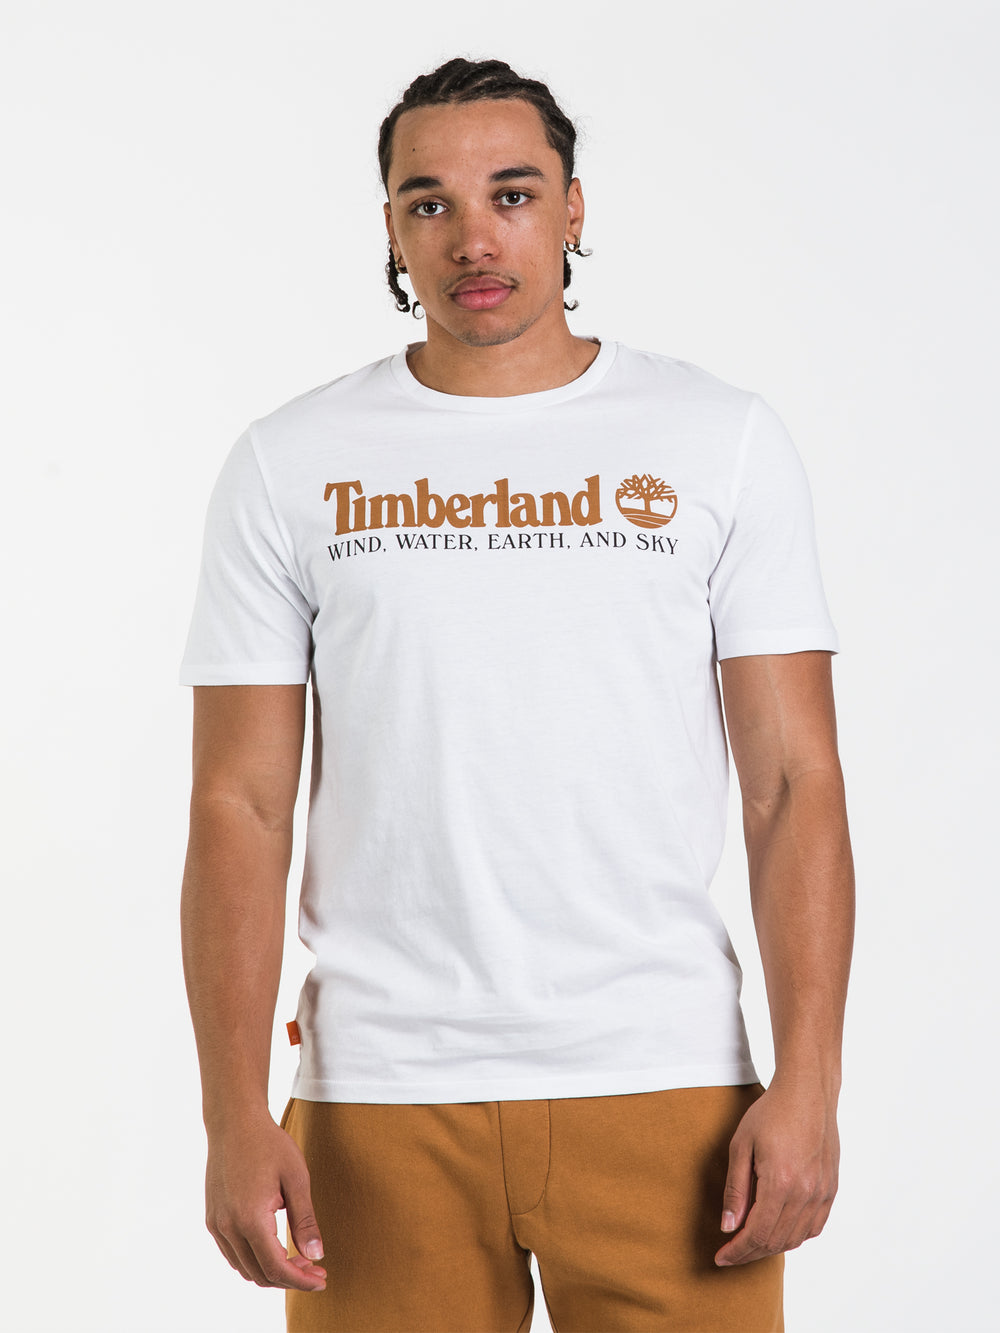 TIMBERLAND WIND, WATER, EARTH & SKY T-SHIRT - CLEARANCE